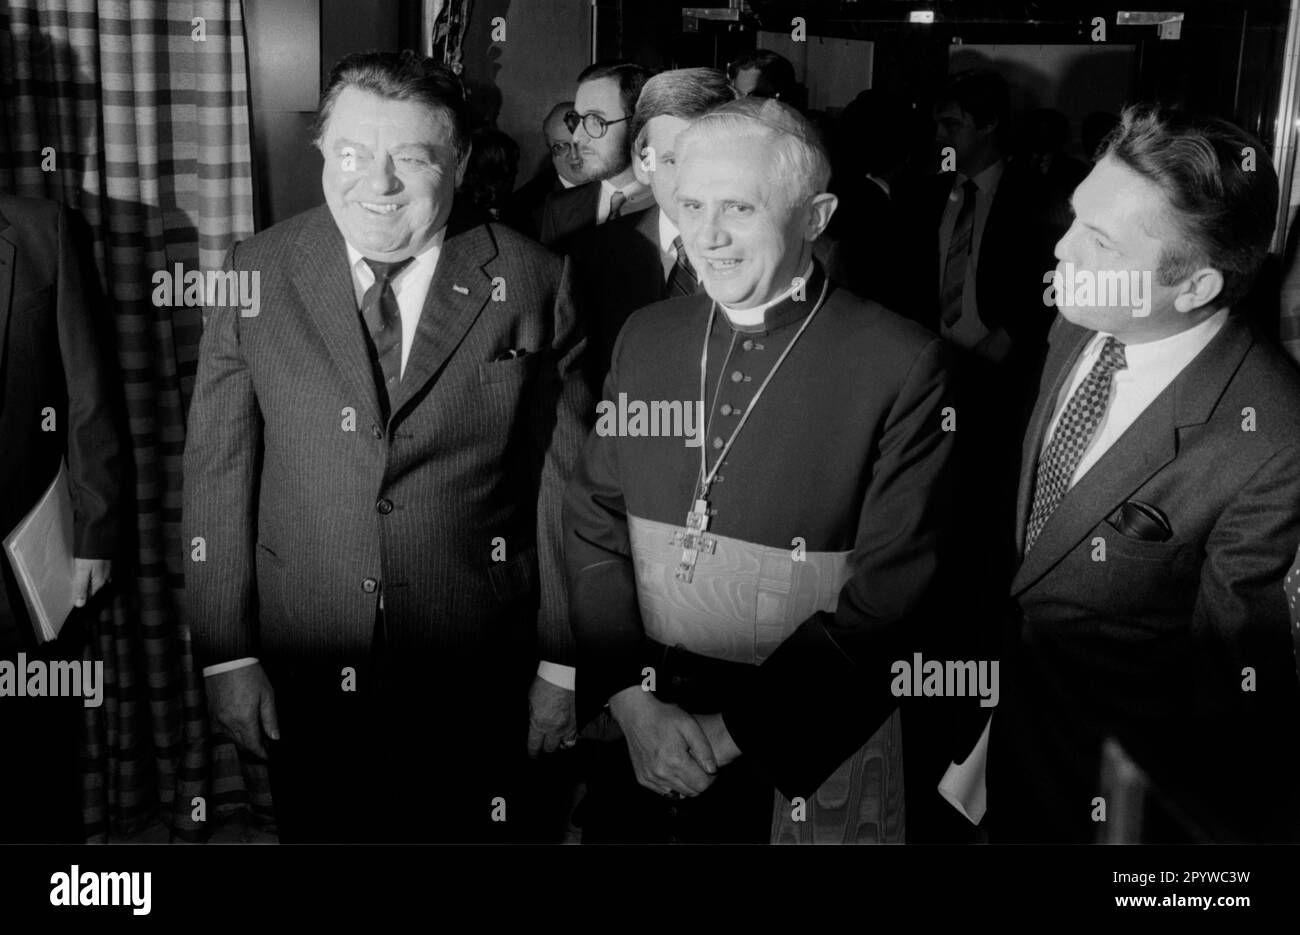 Franz Josef Strauß and Joseph Cardinal Ratzinger at the church New Year's reception in Munich. [automated translation] Stock Photo